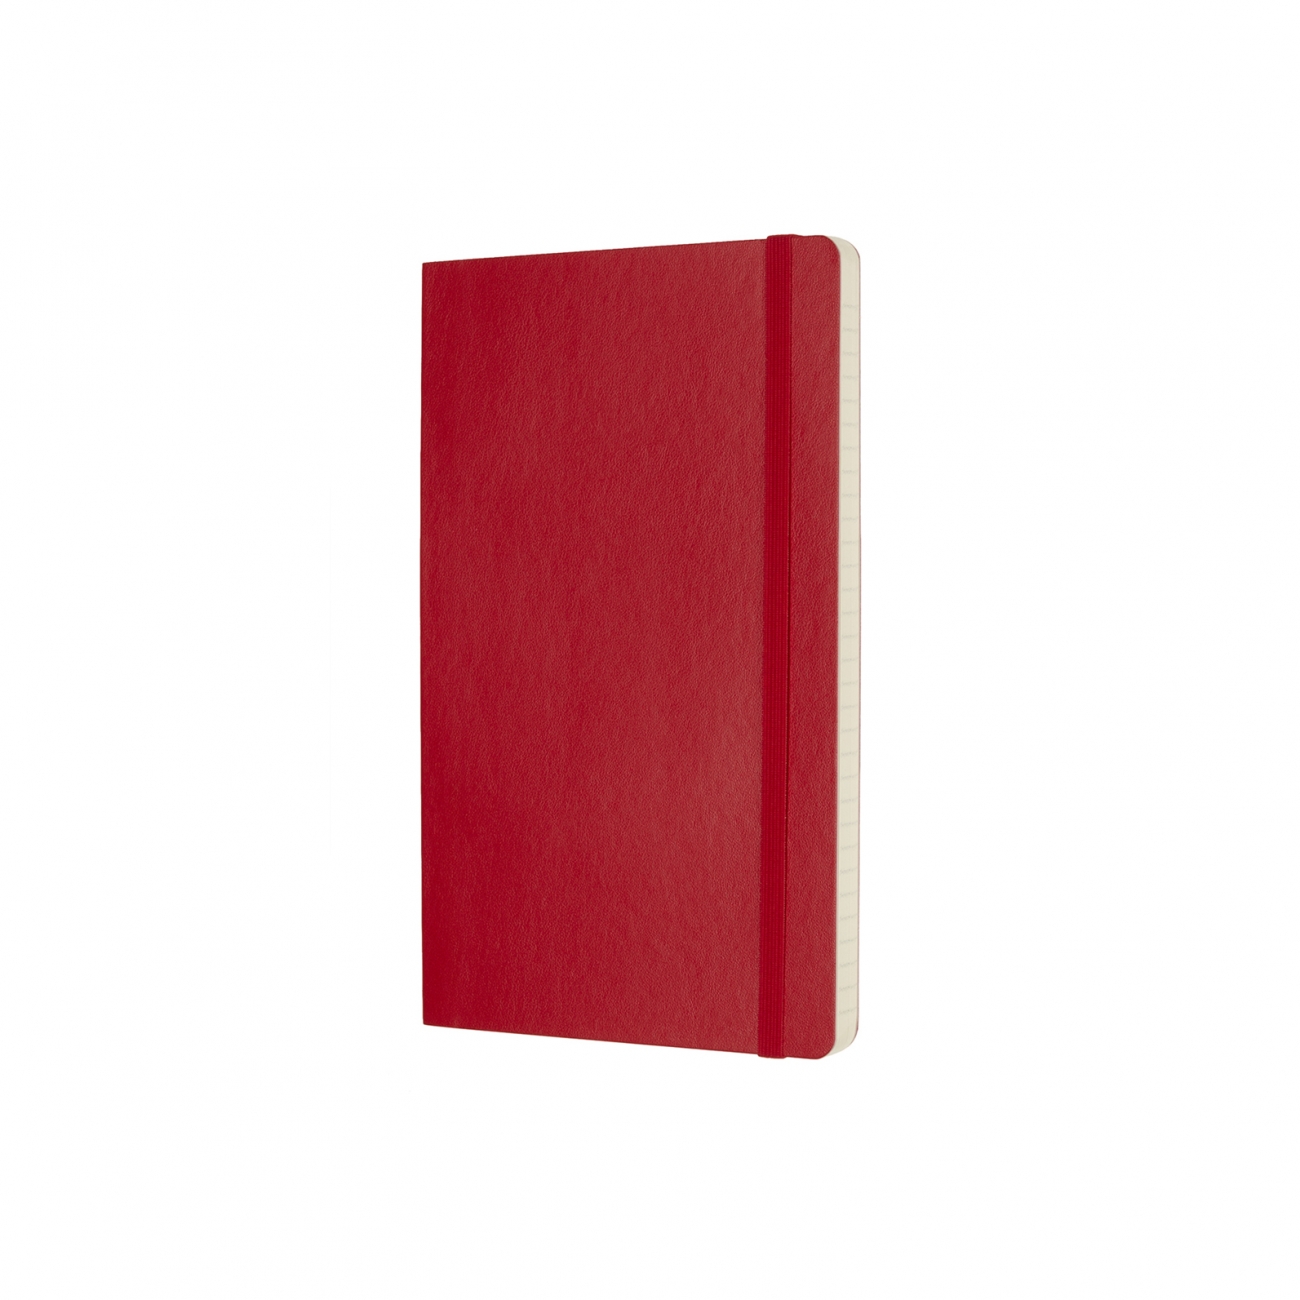 CLASSIC SOFT COVER NOTEBOOK - RULED - LARGE - SCARLET RED